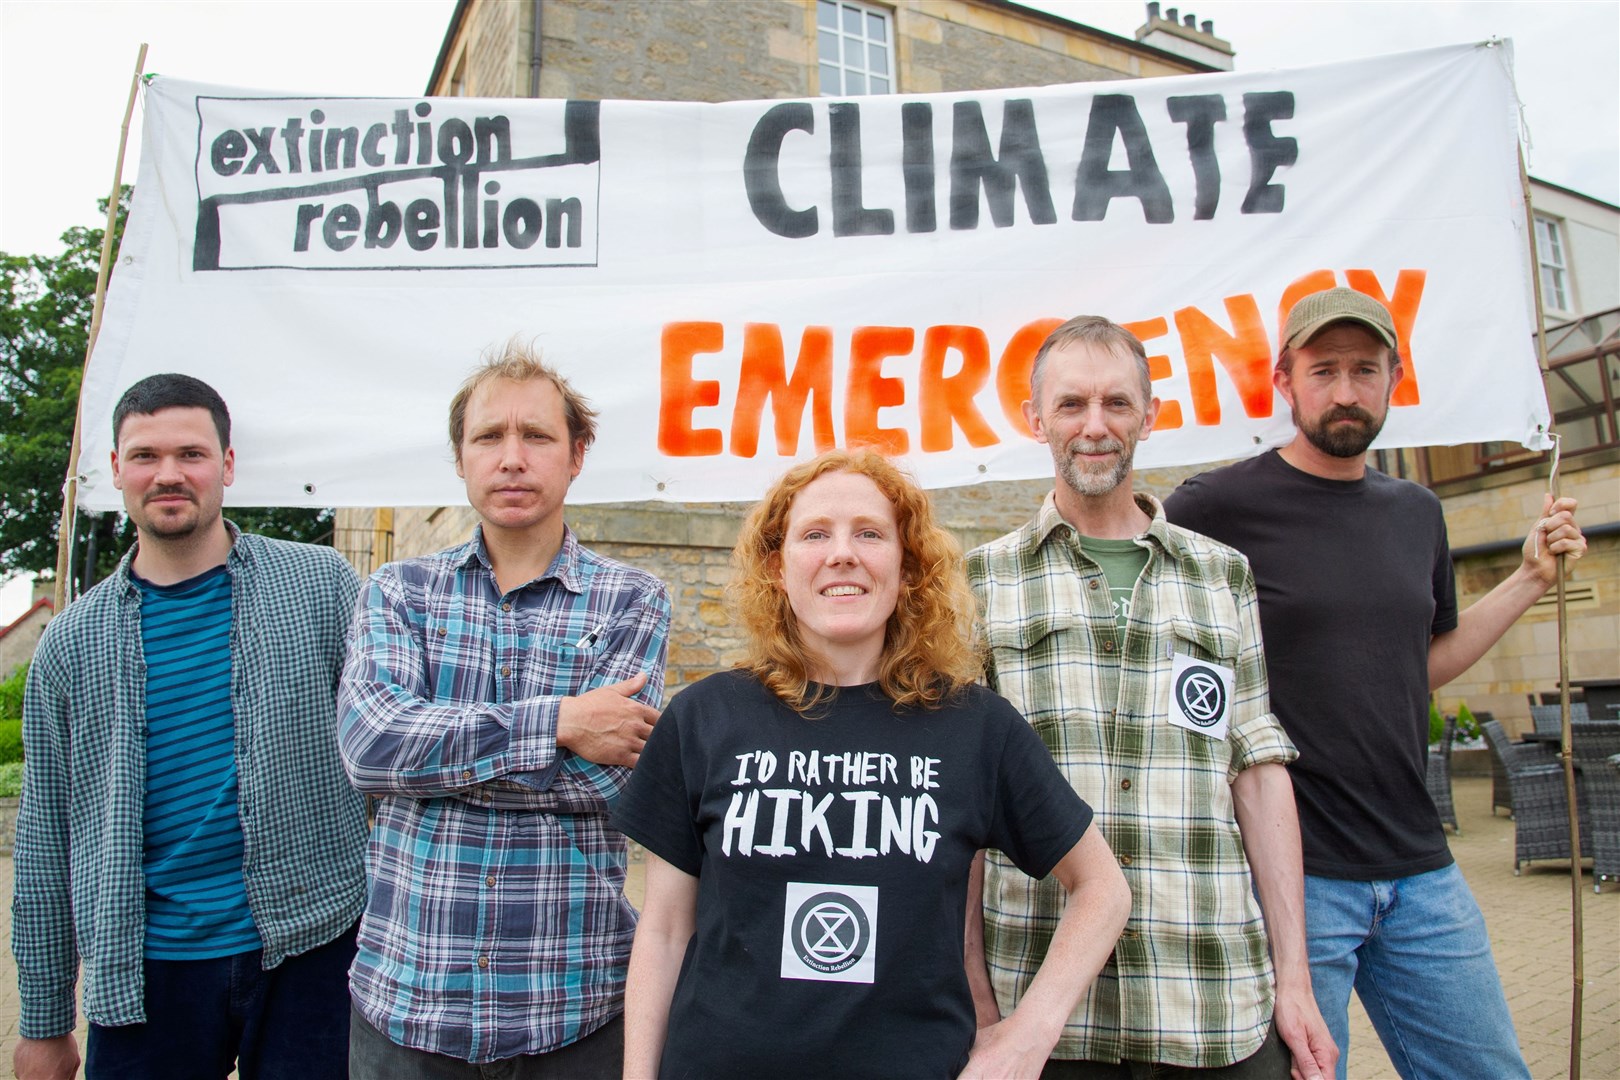 Protesters outside the Mansfield Hotel in Elgin. L-R: Laurence (no surname given), Patrick Cooper, Susannah Peel, Simon MacLardie and Andrew Heath.